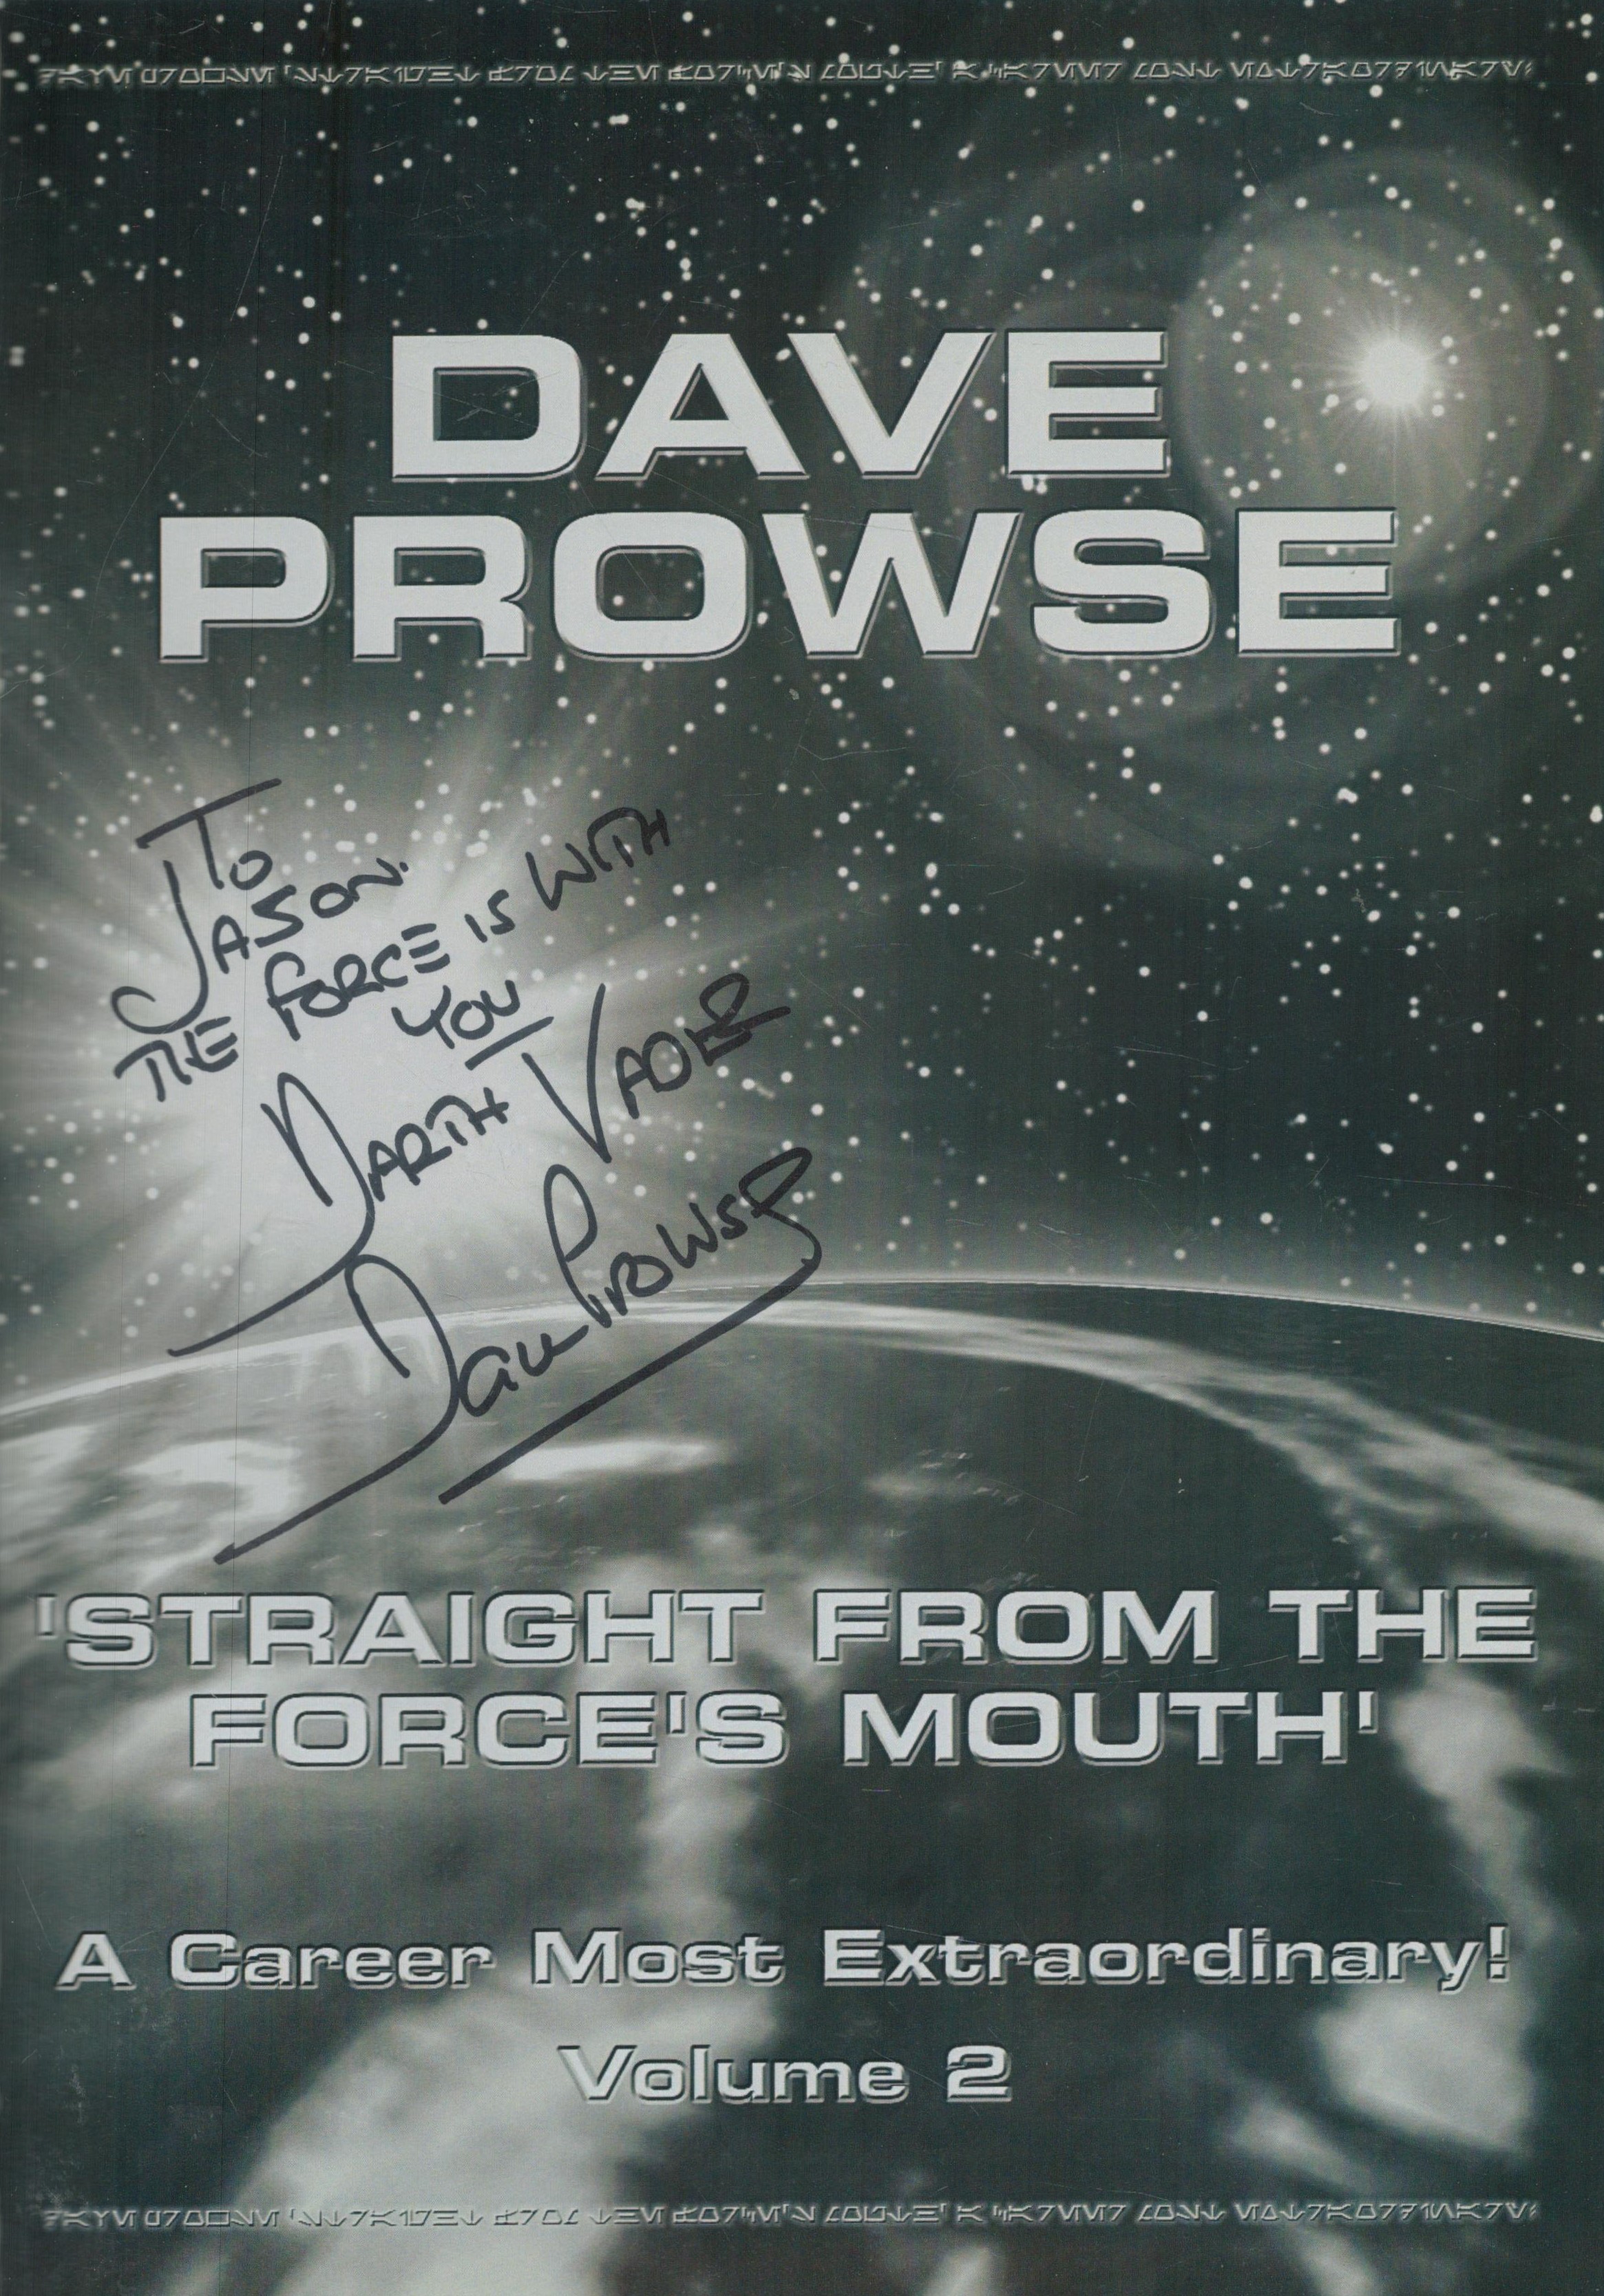 Actor Dave Prowse signed 1st Edition paperback book titled Straight from The Forces Mouth. signature - Image 2 of 3